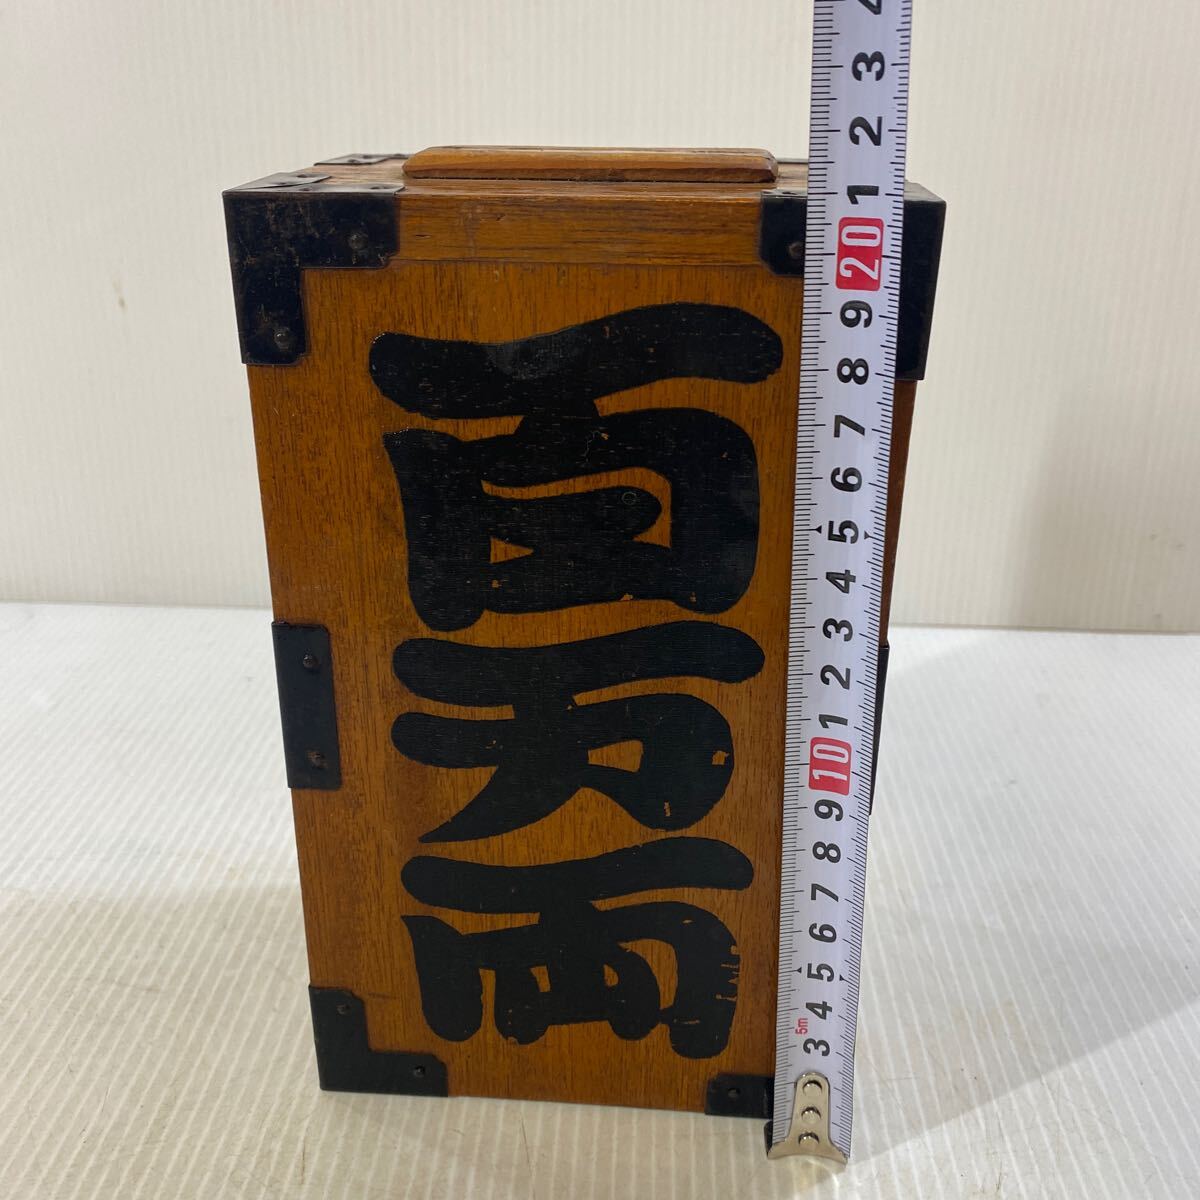  with translation key less wooden savings box Showa Retro Japanese style ... ticket 100 ten thousand both interior objet d'art condition included used 